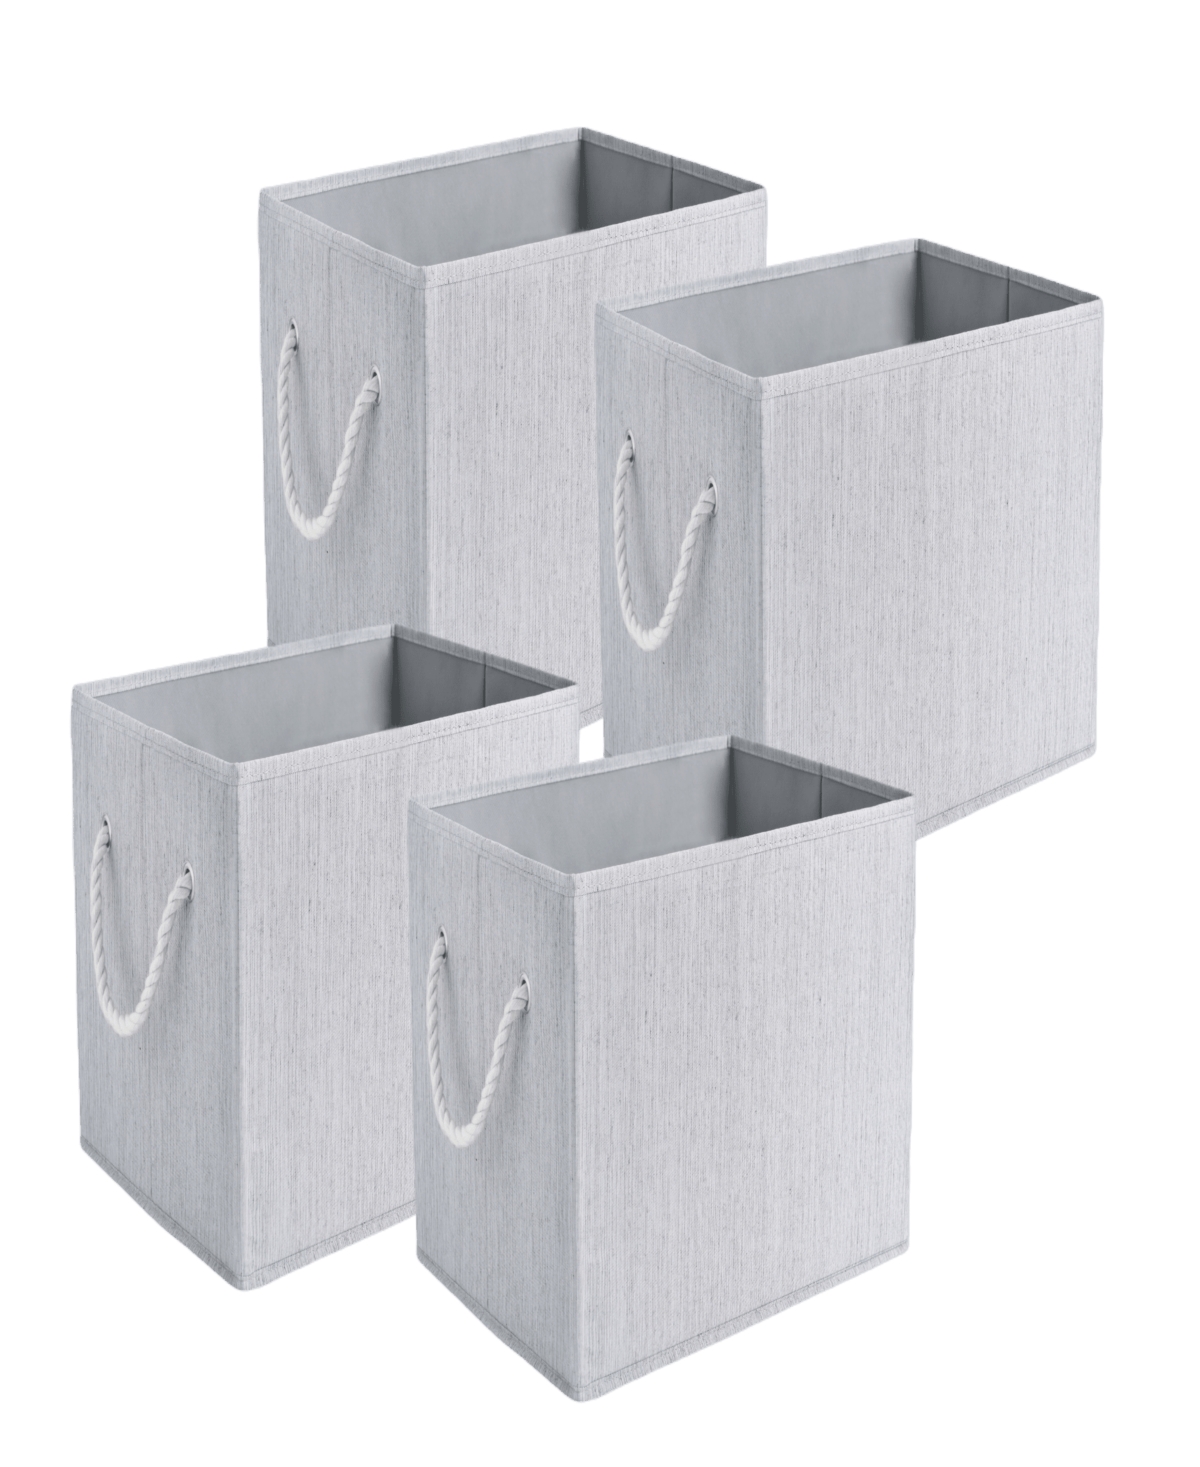 Wethinkstorage 34 Litre Collapsible Fabric Storage Bins With Cotton Rope Handles, Set Of 4 In Gray